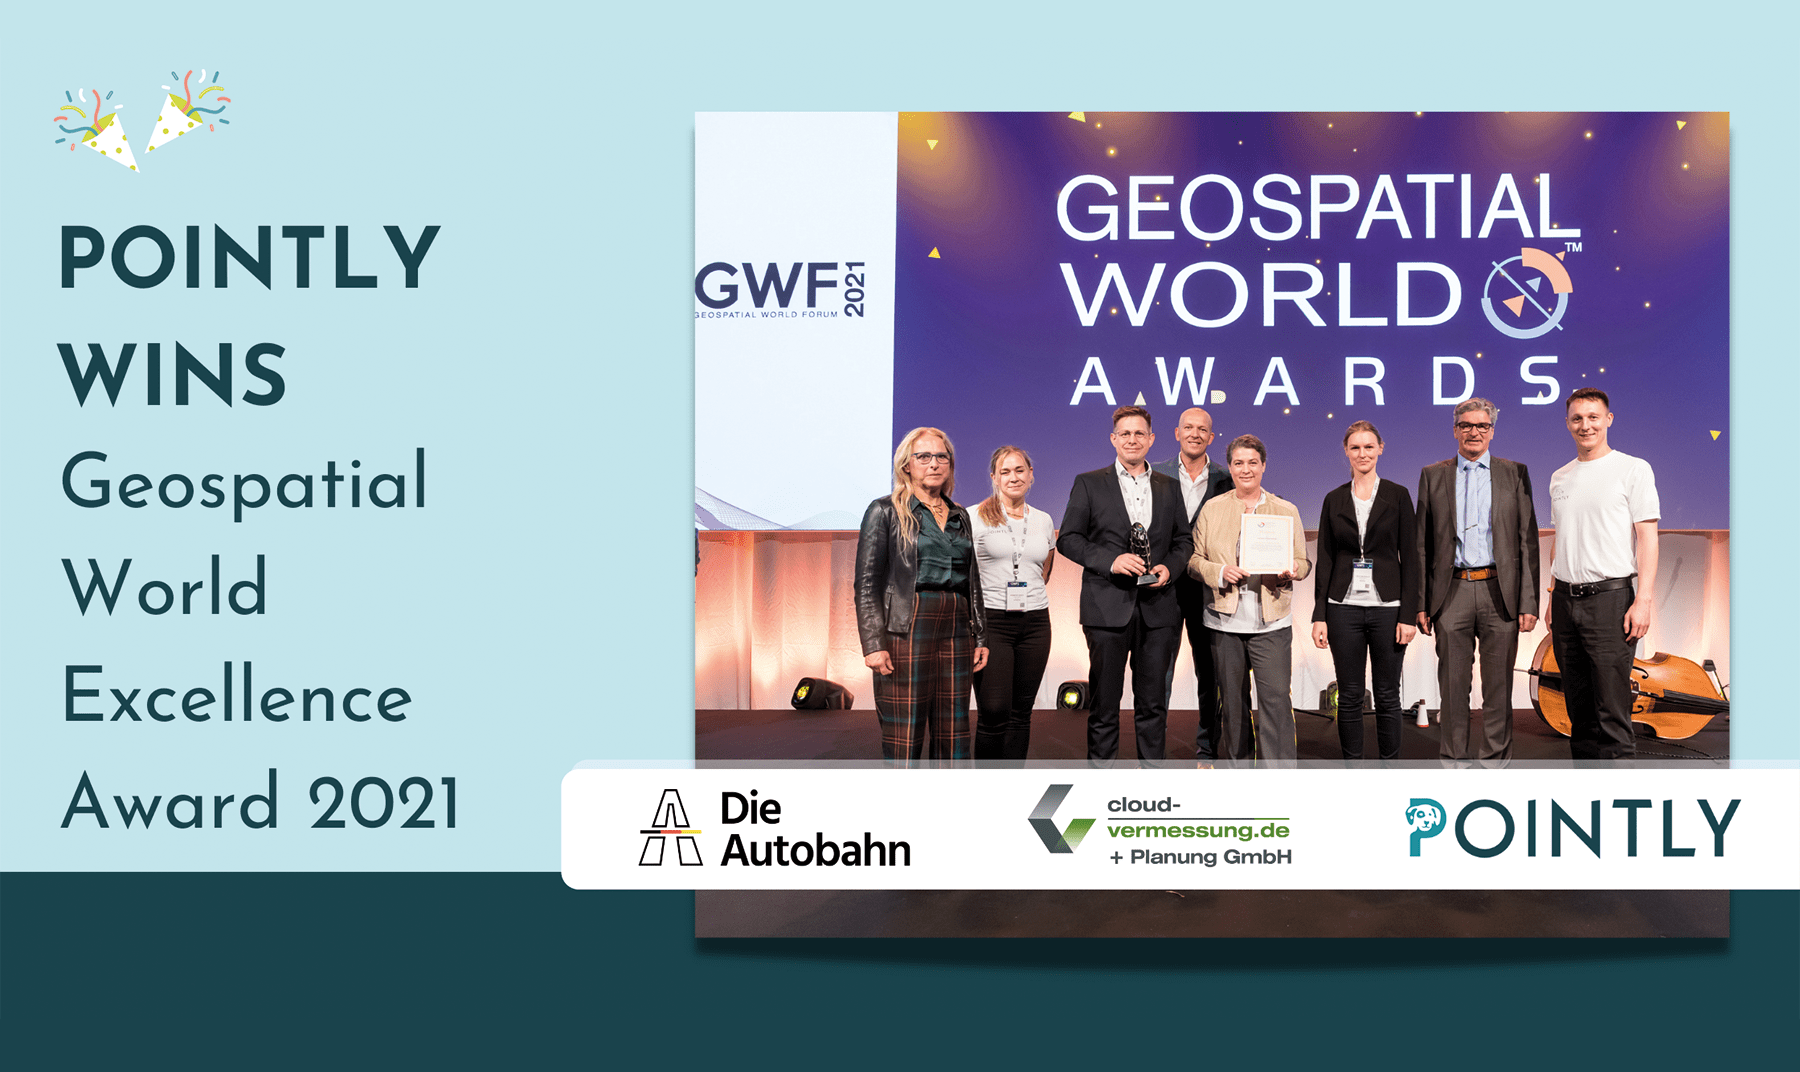 Geospatial World Award Winner 2021 - The involved Team-Members of Pointly